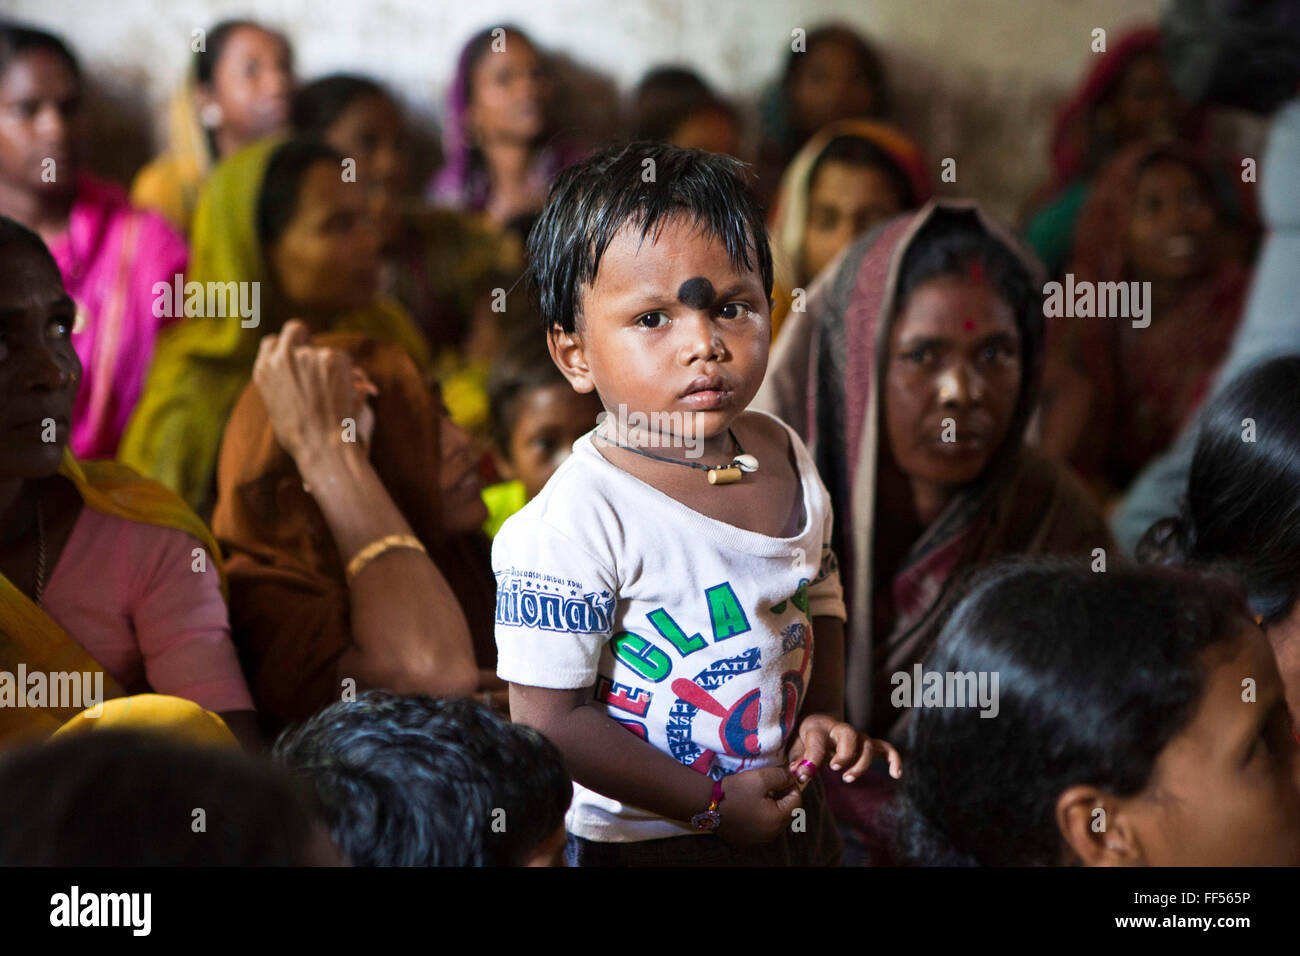 Families from Cuttack get legal advice and birth certificates from a Legal Aid Clinic run by the organisation CLAP. Committee for Legal Aid to Poor (CLAP), helps provide legal aid to the poorer communities in the Orissa district of India. Stock Photo